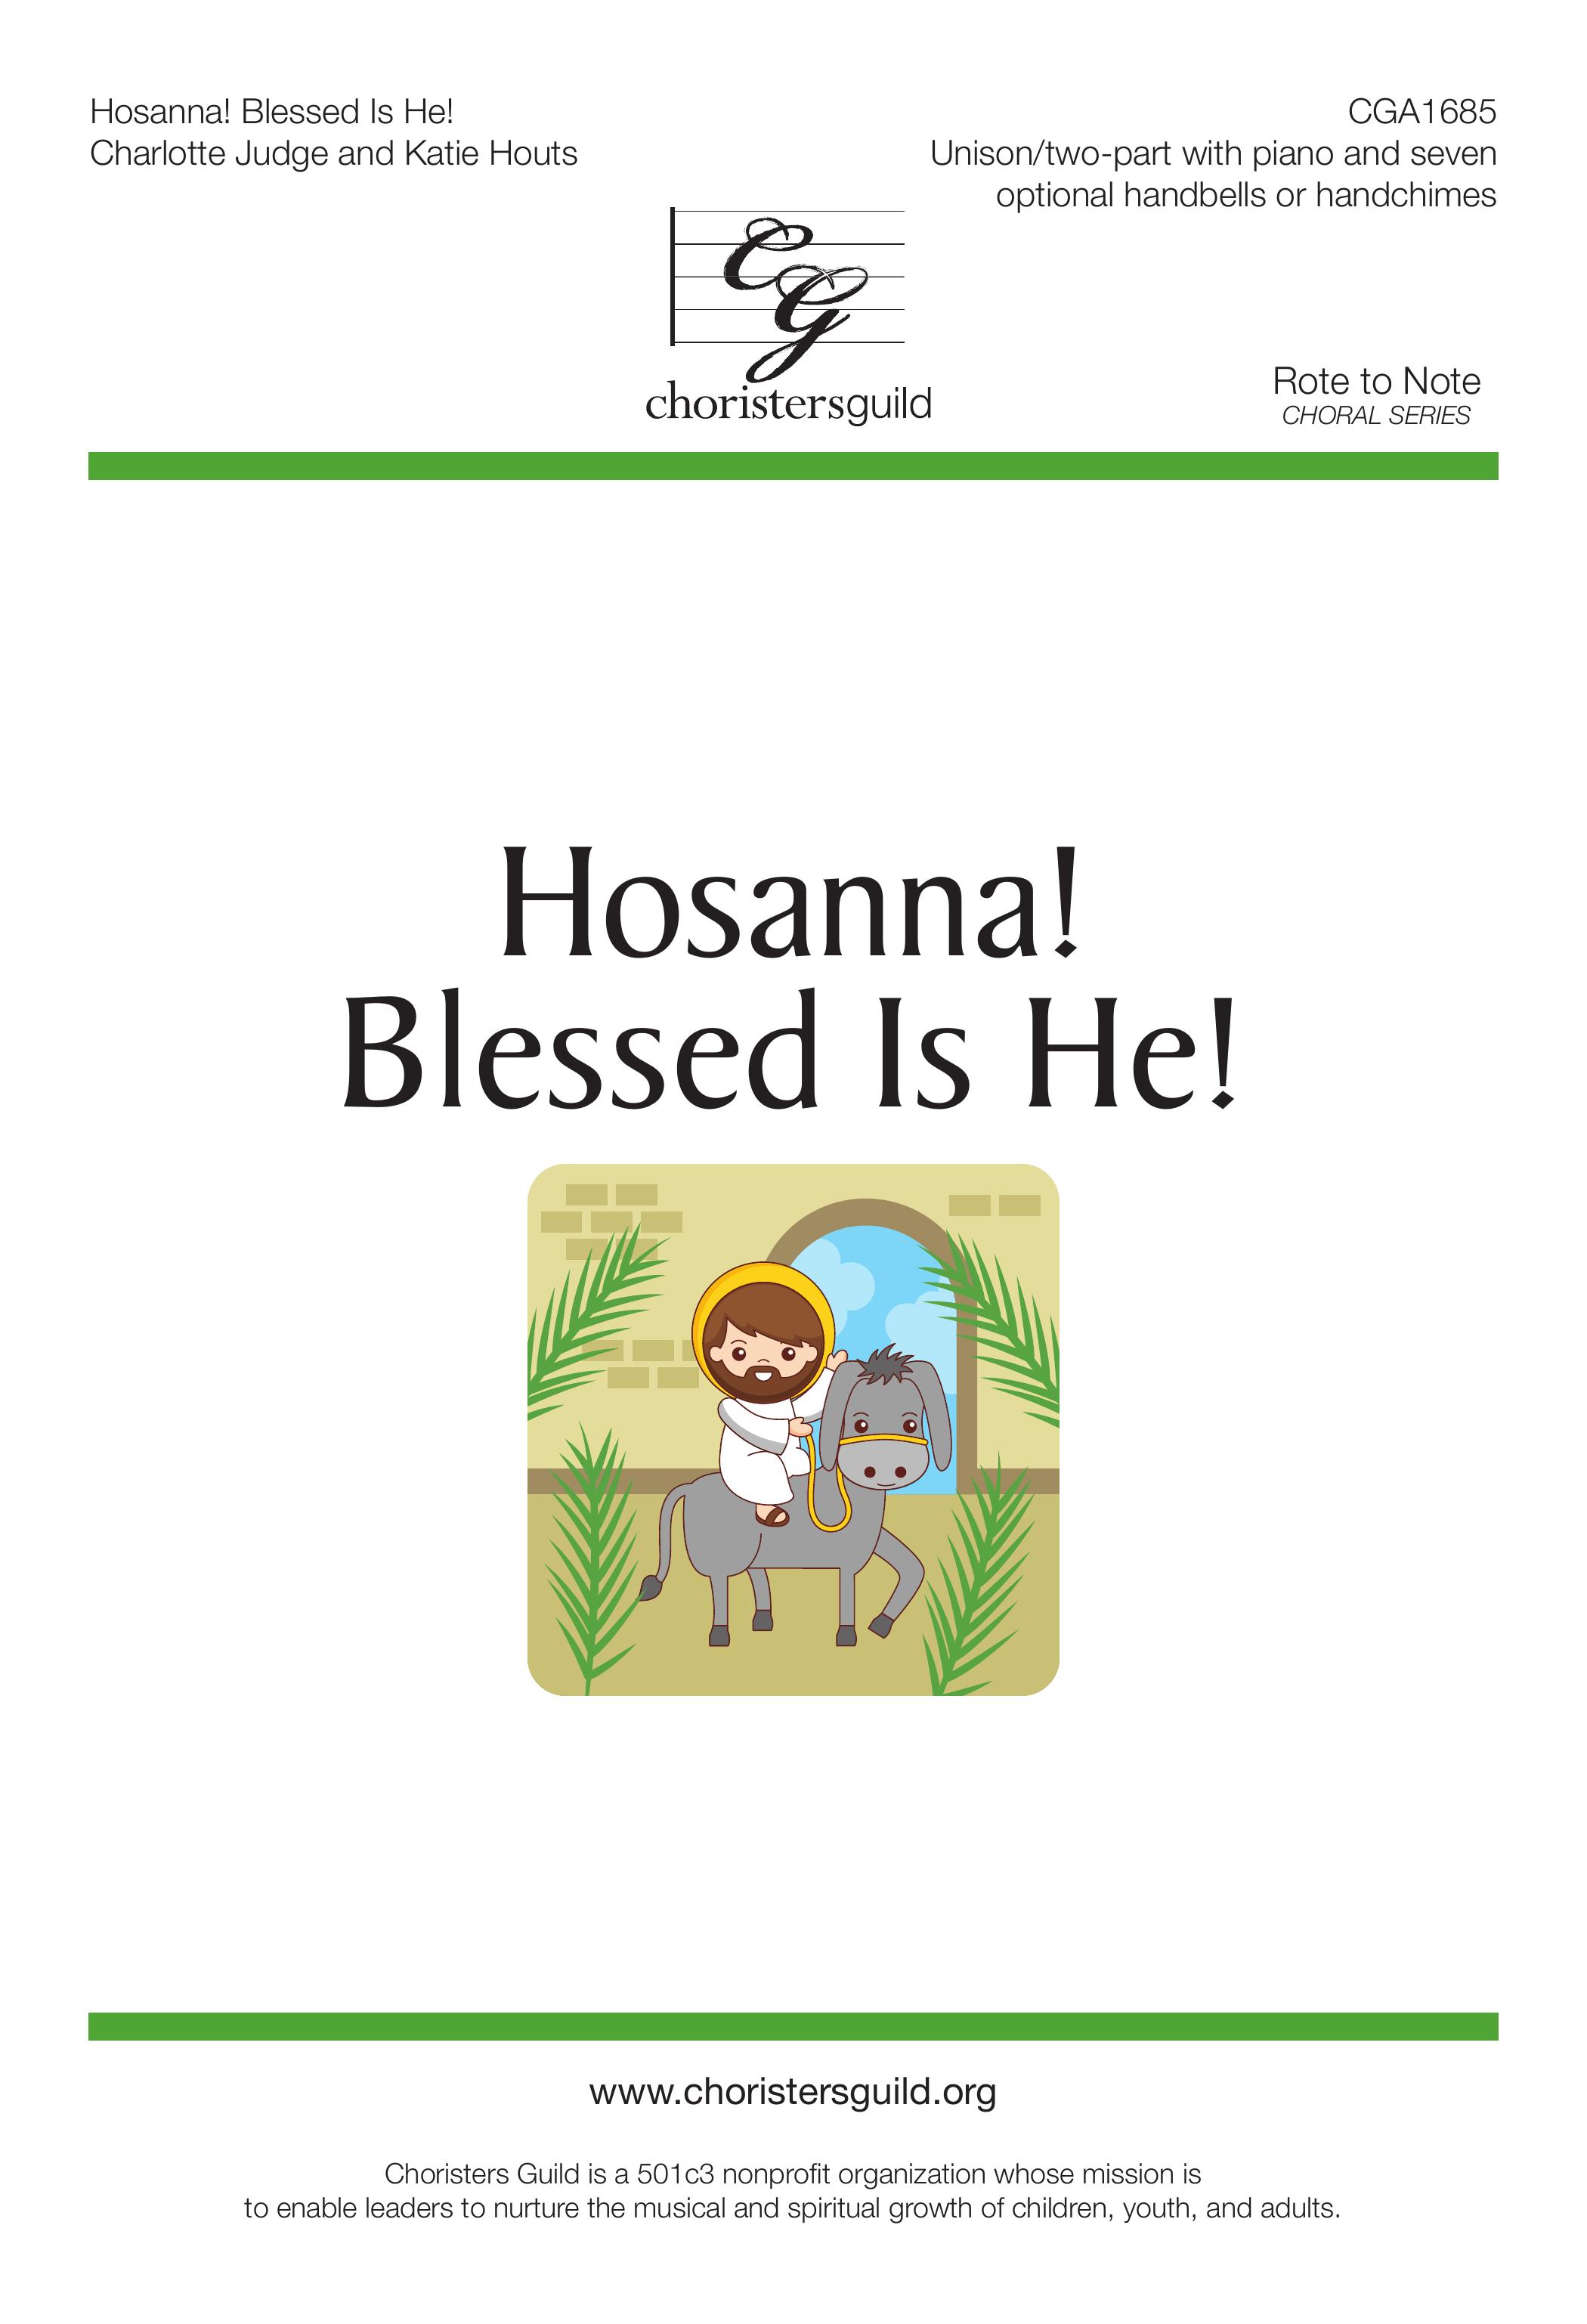 Hosanna! Blessed is He!